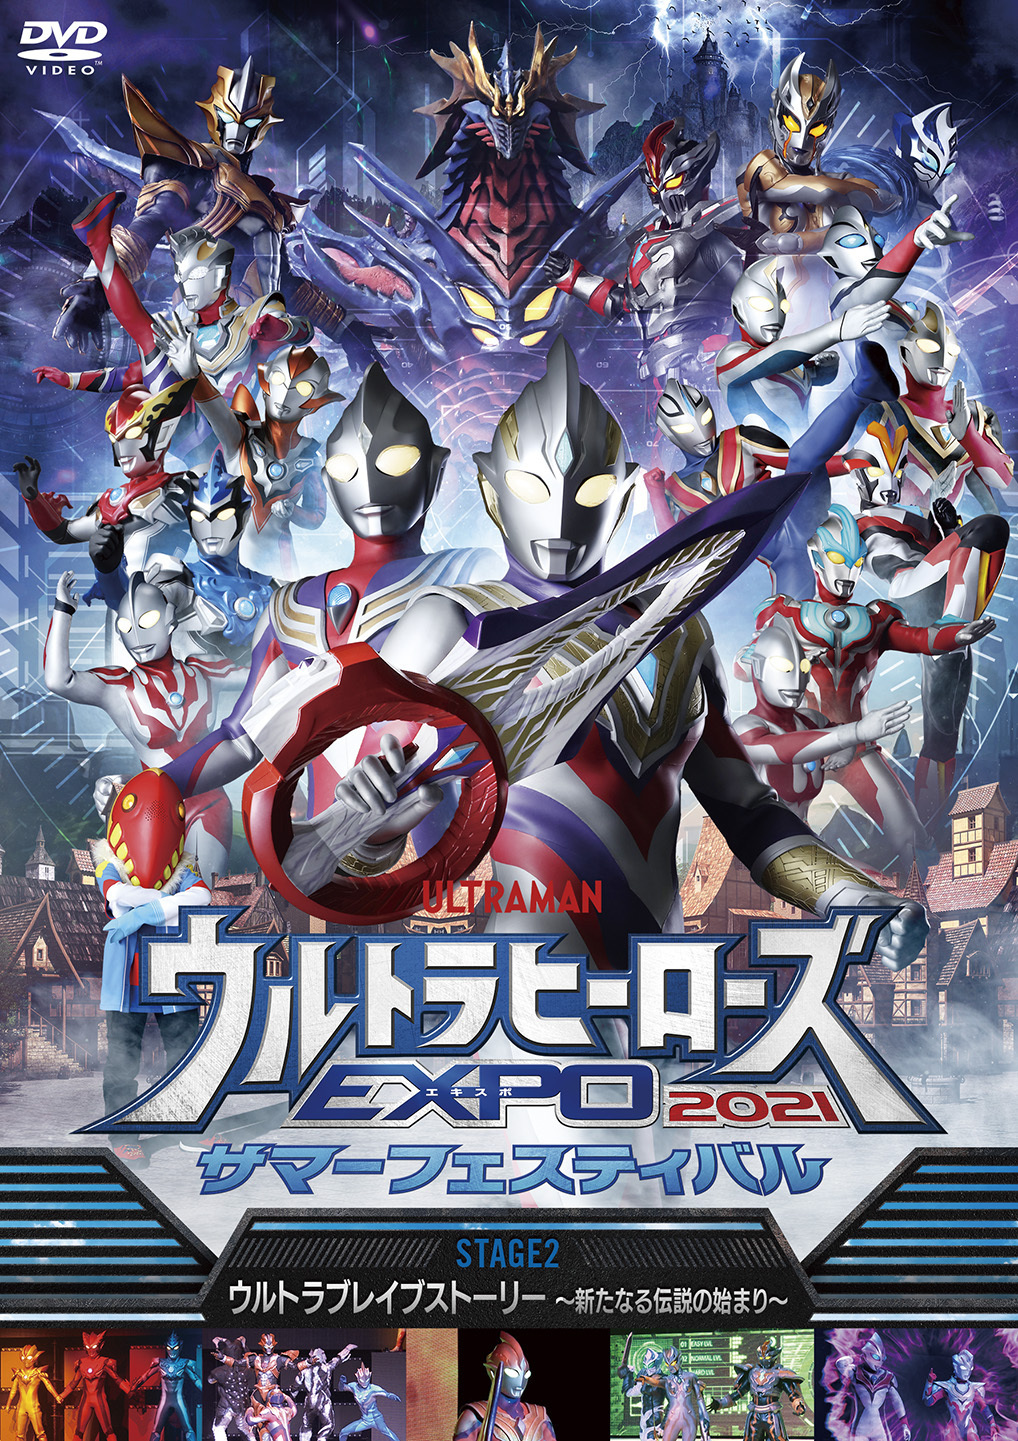 NEW GENERATION THE LIVE: Ultraman Trigger STAGE 2 | Ultraman Wiki